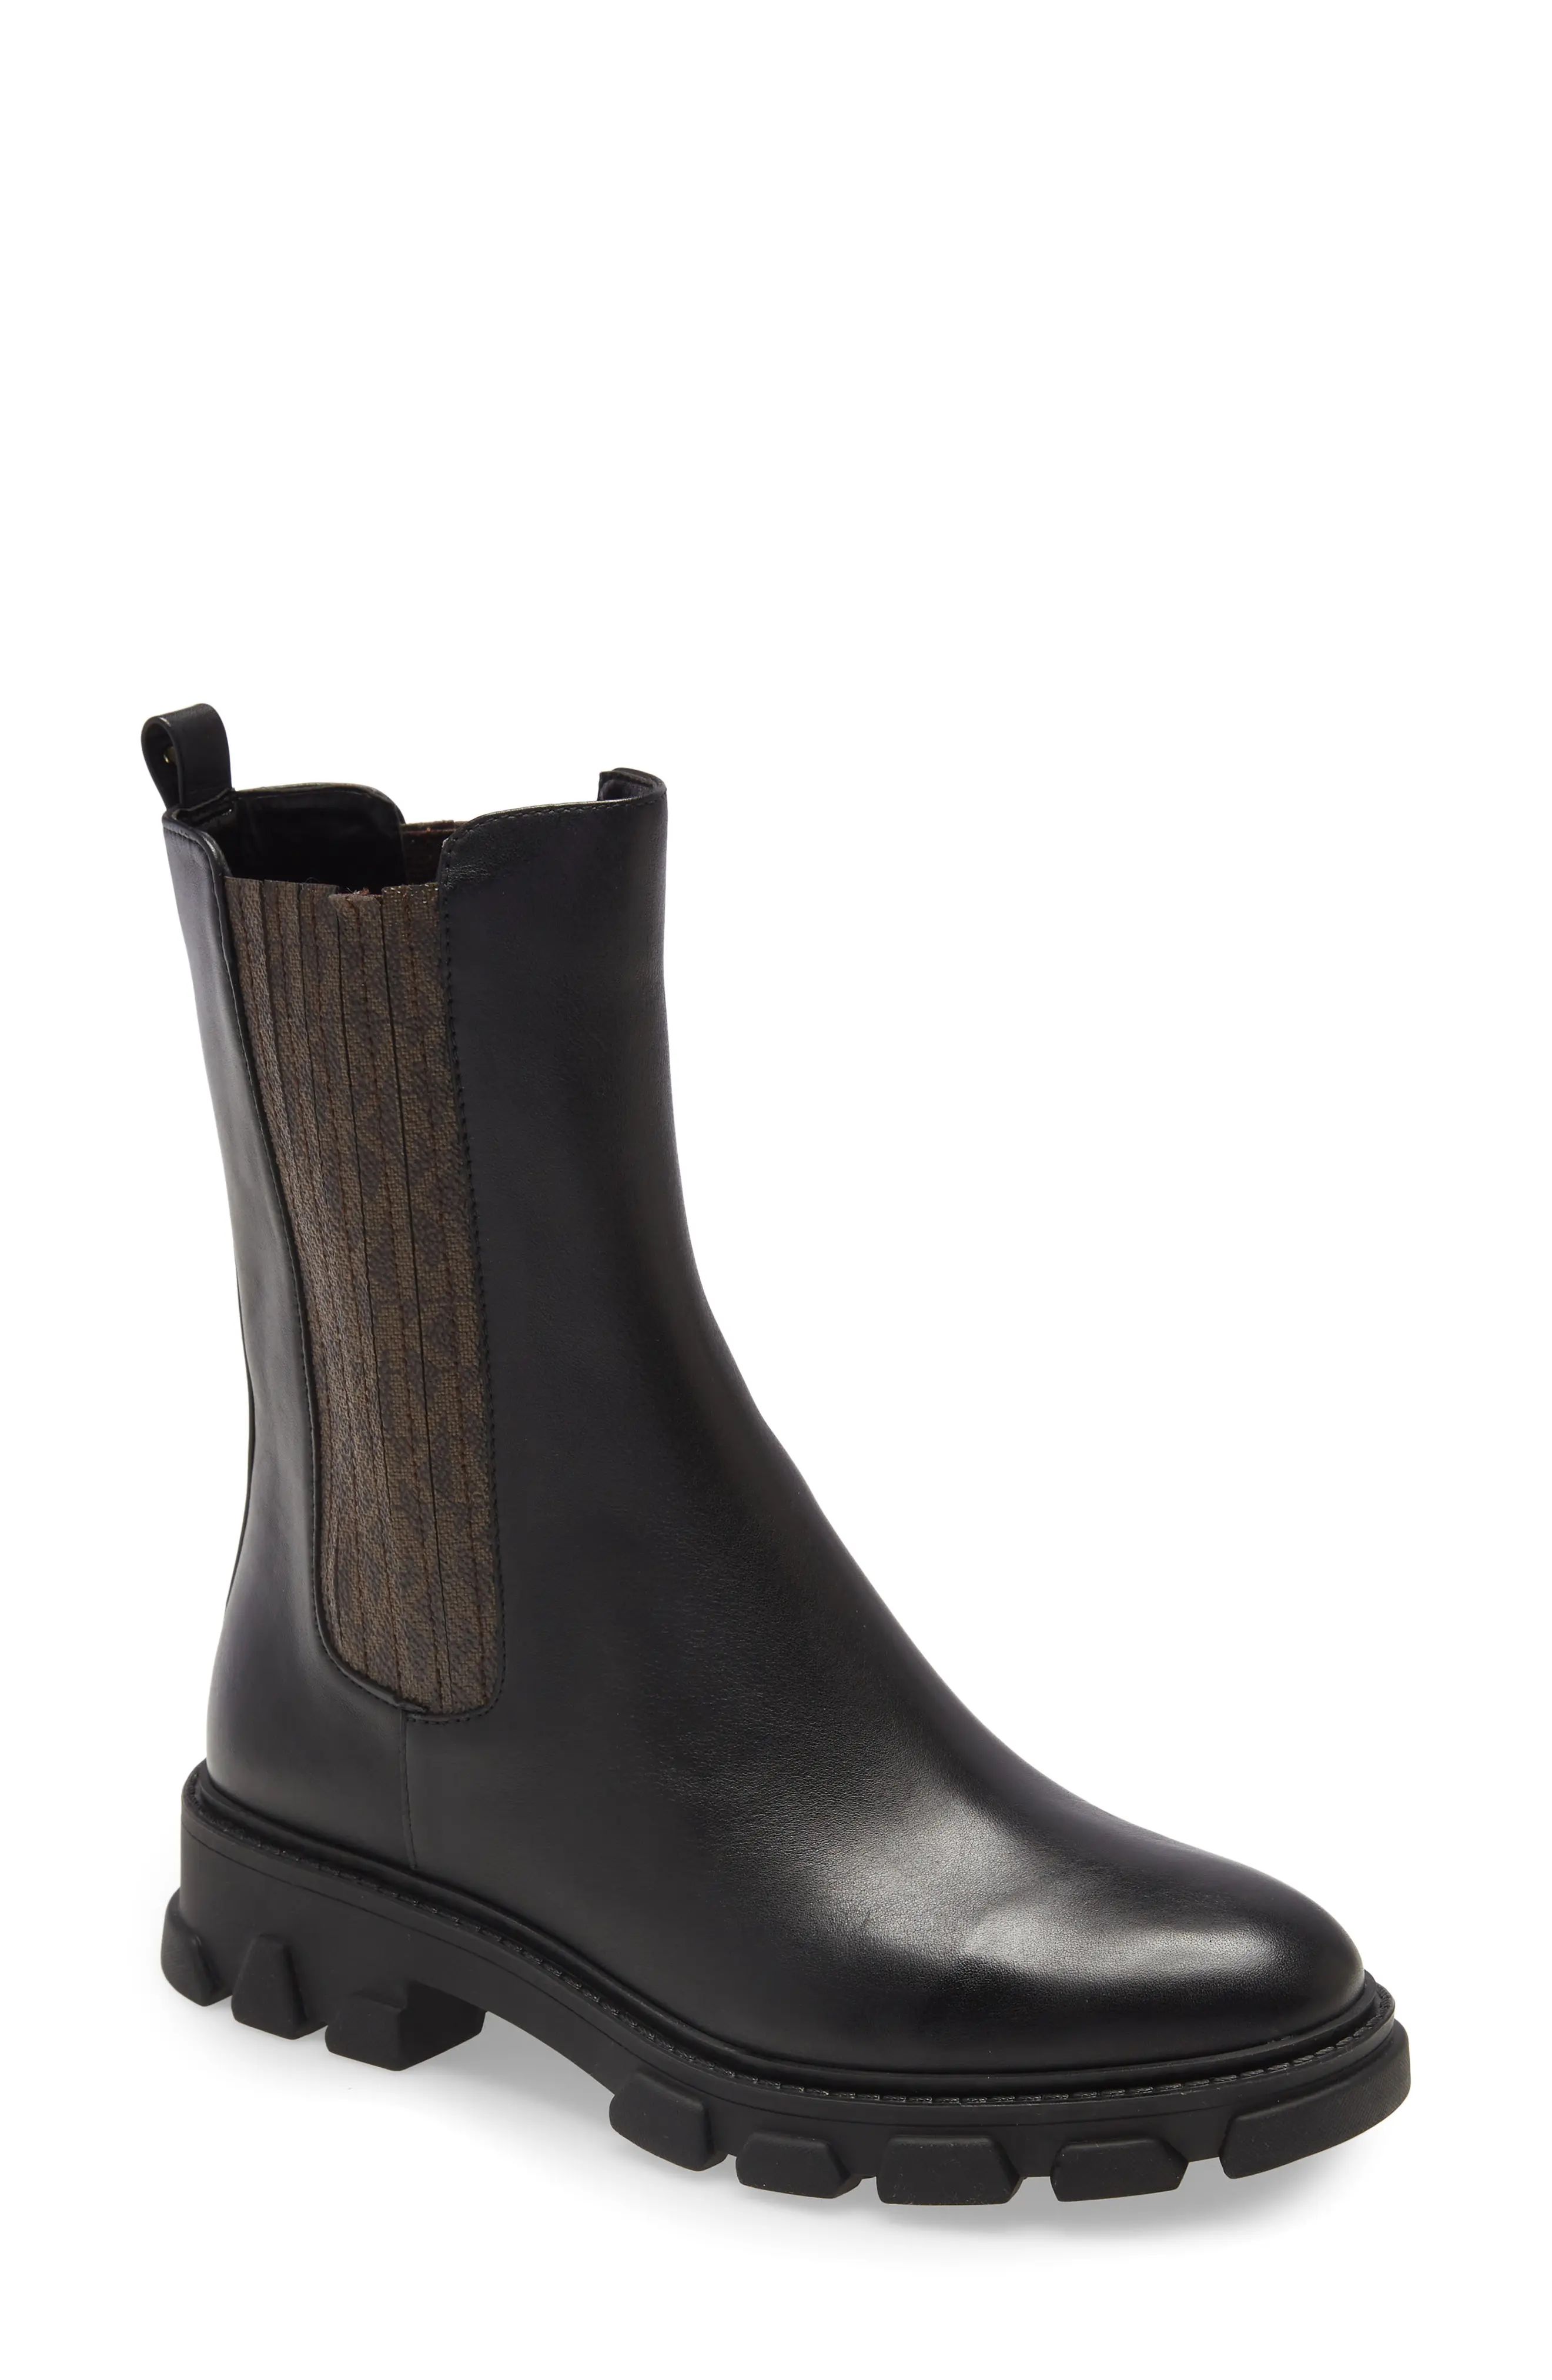 MICHAEL Michael Kors Ridley Chelsea Boot in Black/Brown at Nordstrom, Size 8 | Nordstrom